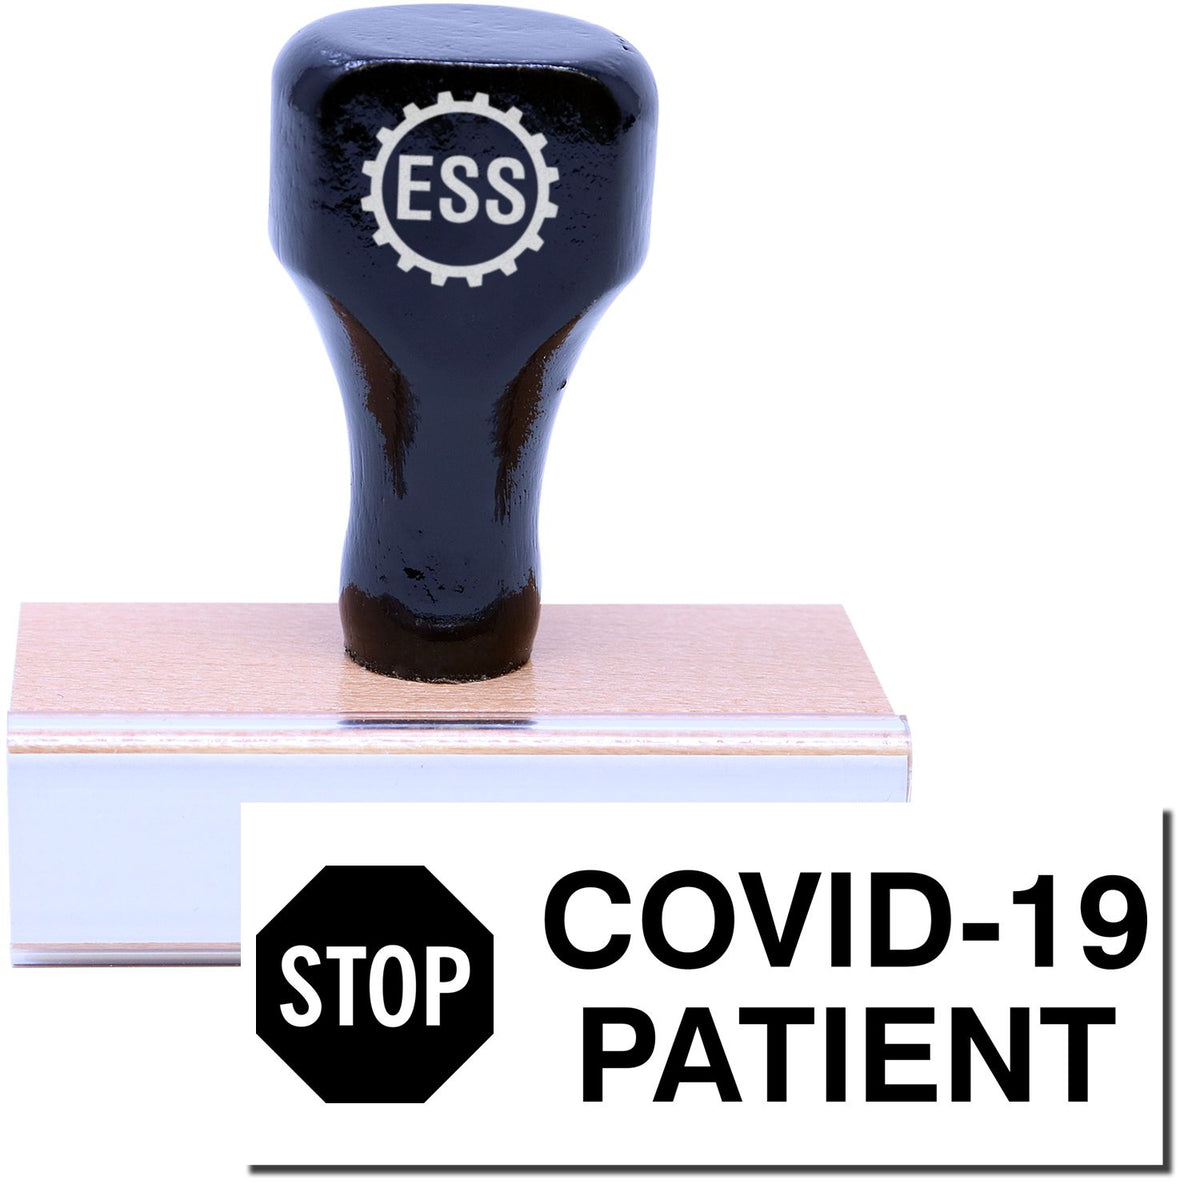 A stock office rubber stamp with a stamped image showing how the text &quot;COVID-19 PATIENT&quot; in a large font with a &quot;STOP&quot; sign board on the left side is displayed after stamping.